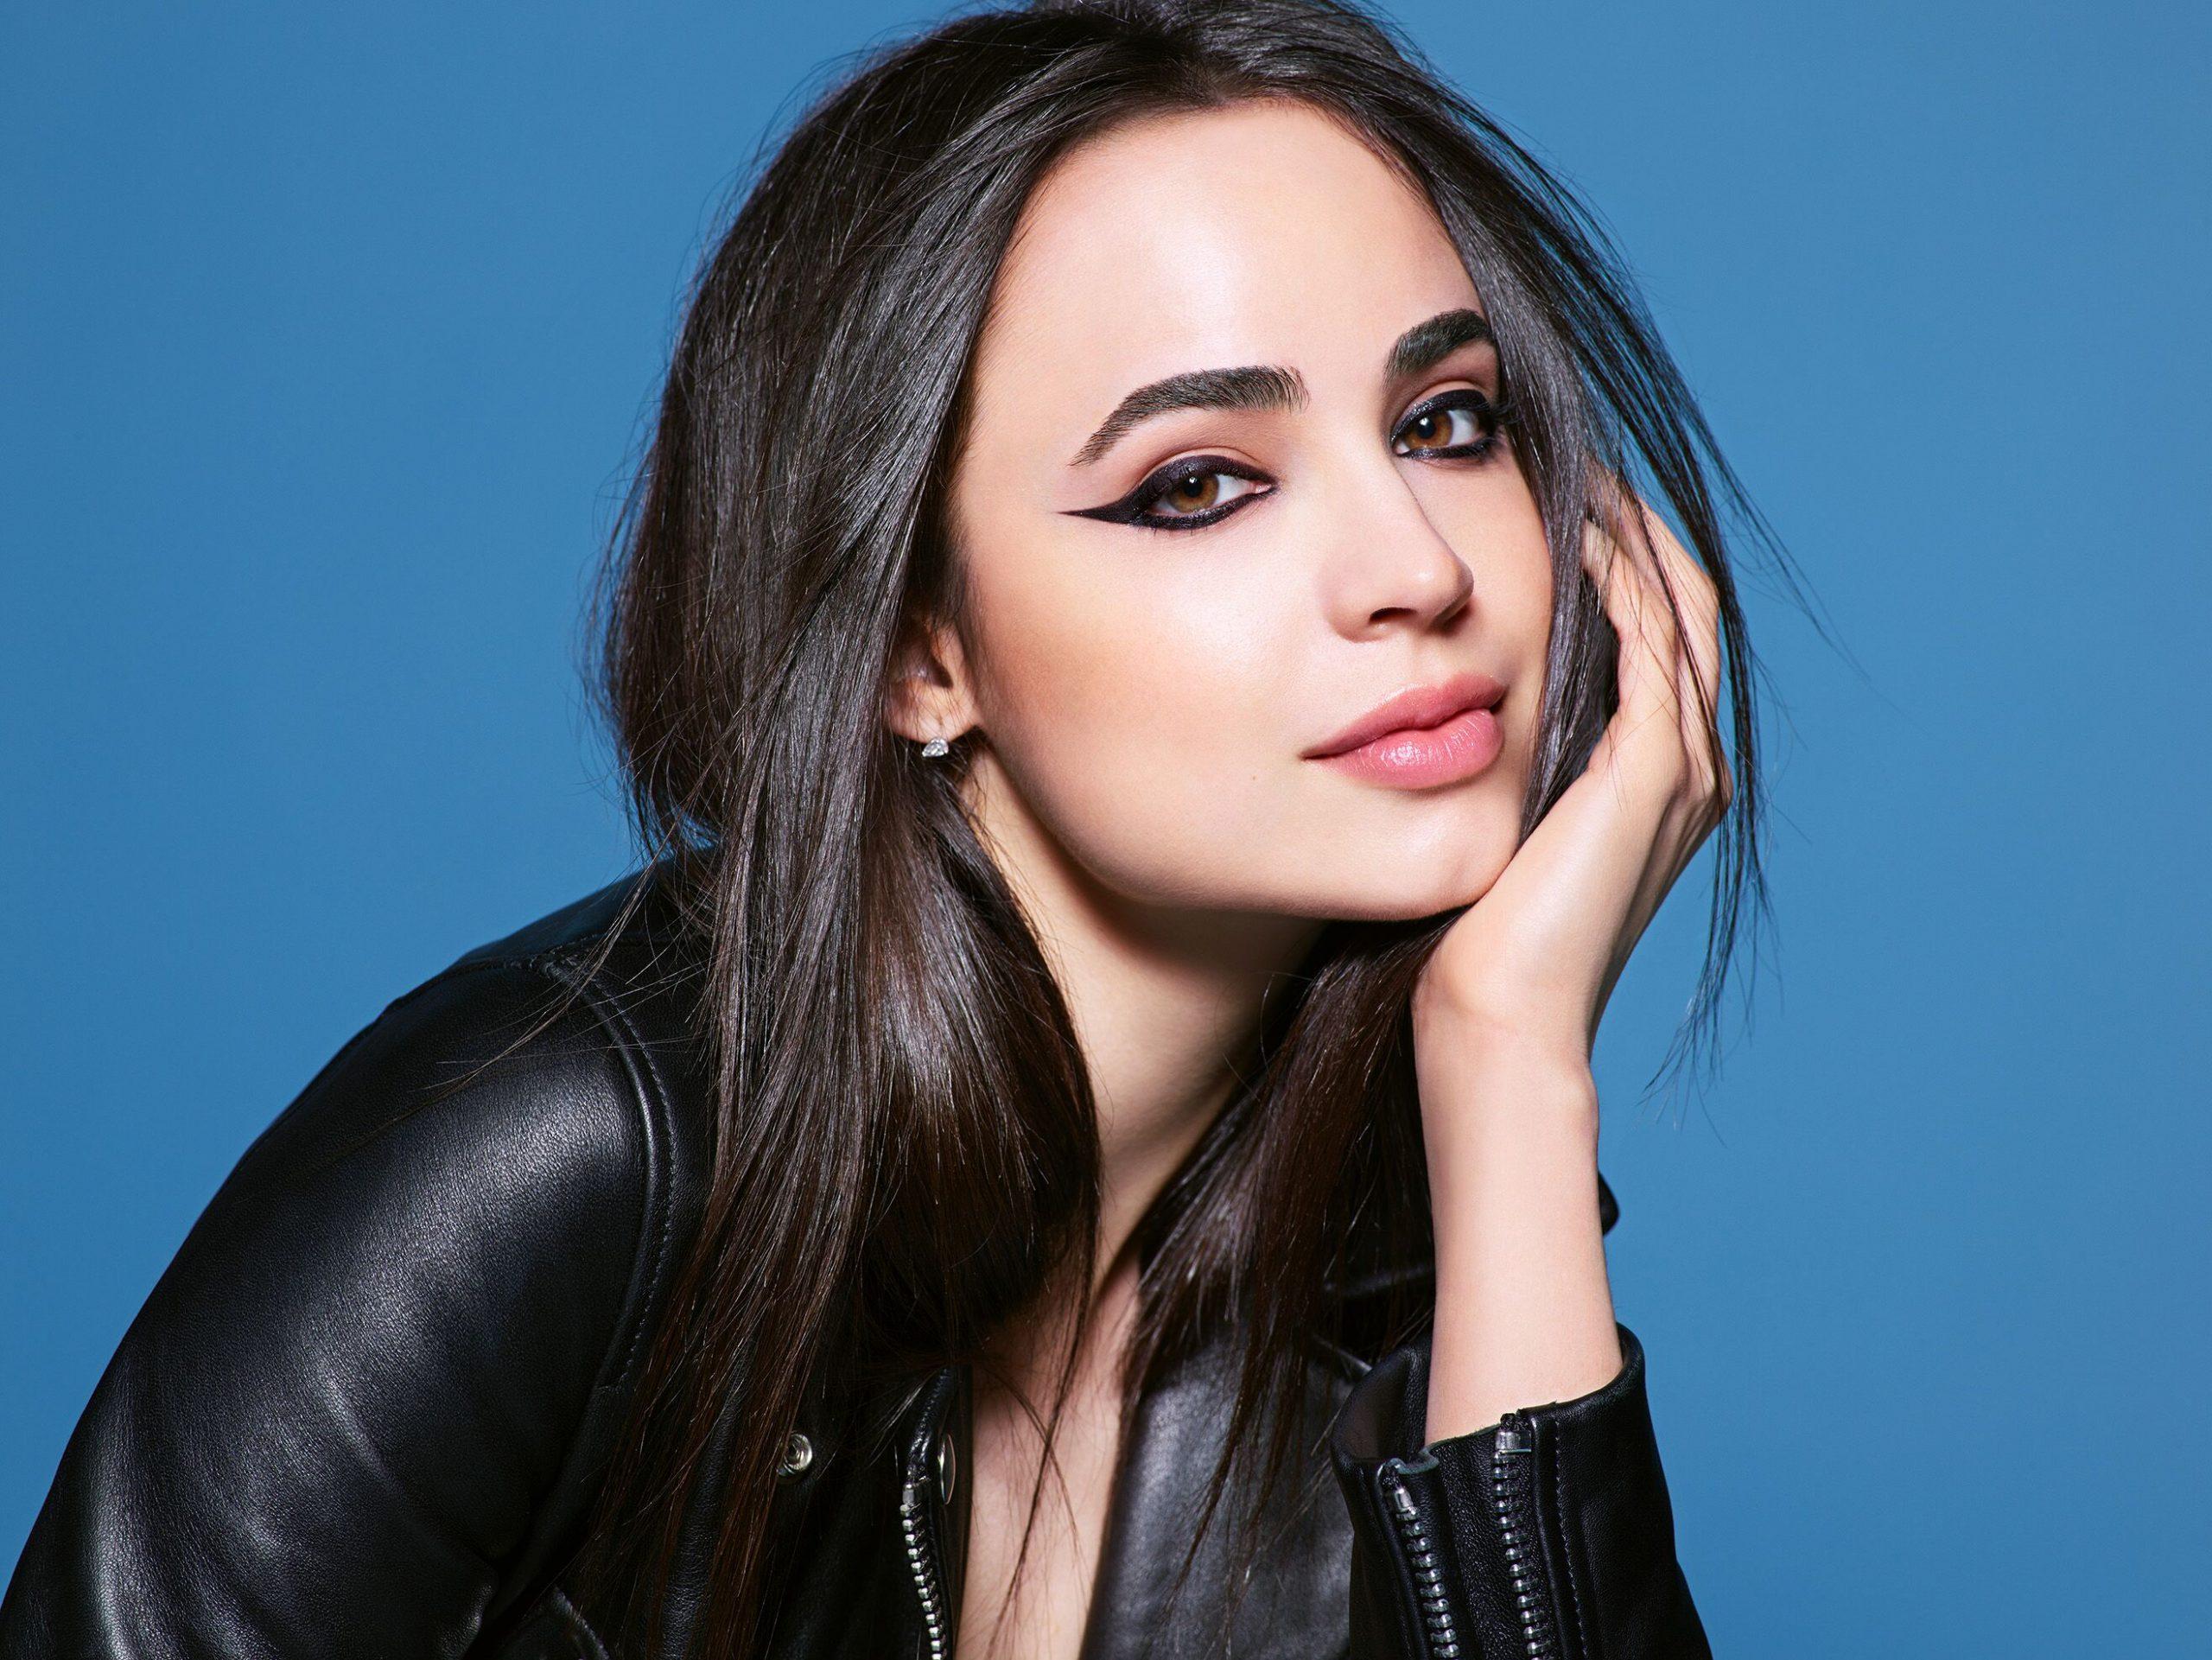 Sofia Carson is on fleek with dramatic eye make-up as she apos s announced as new face of Revlon